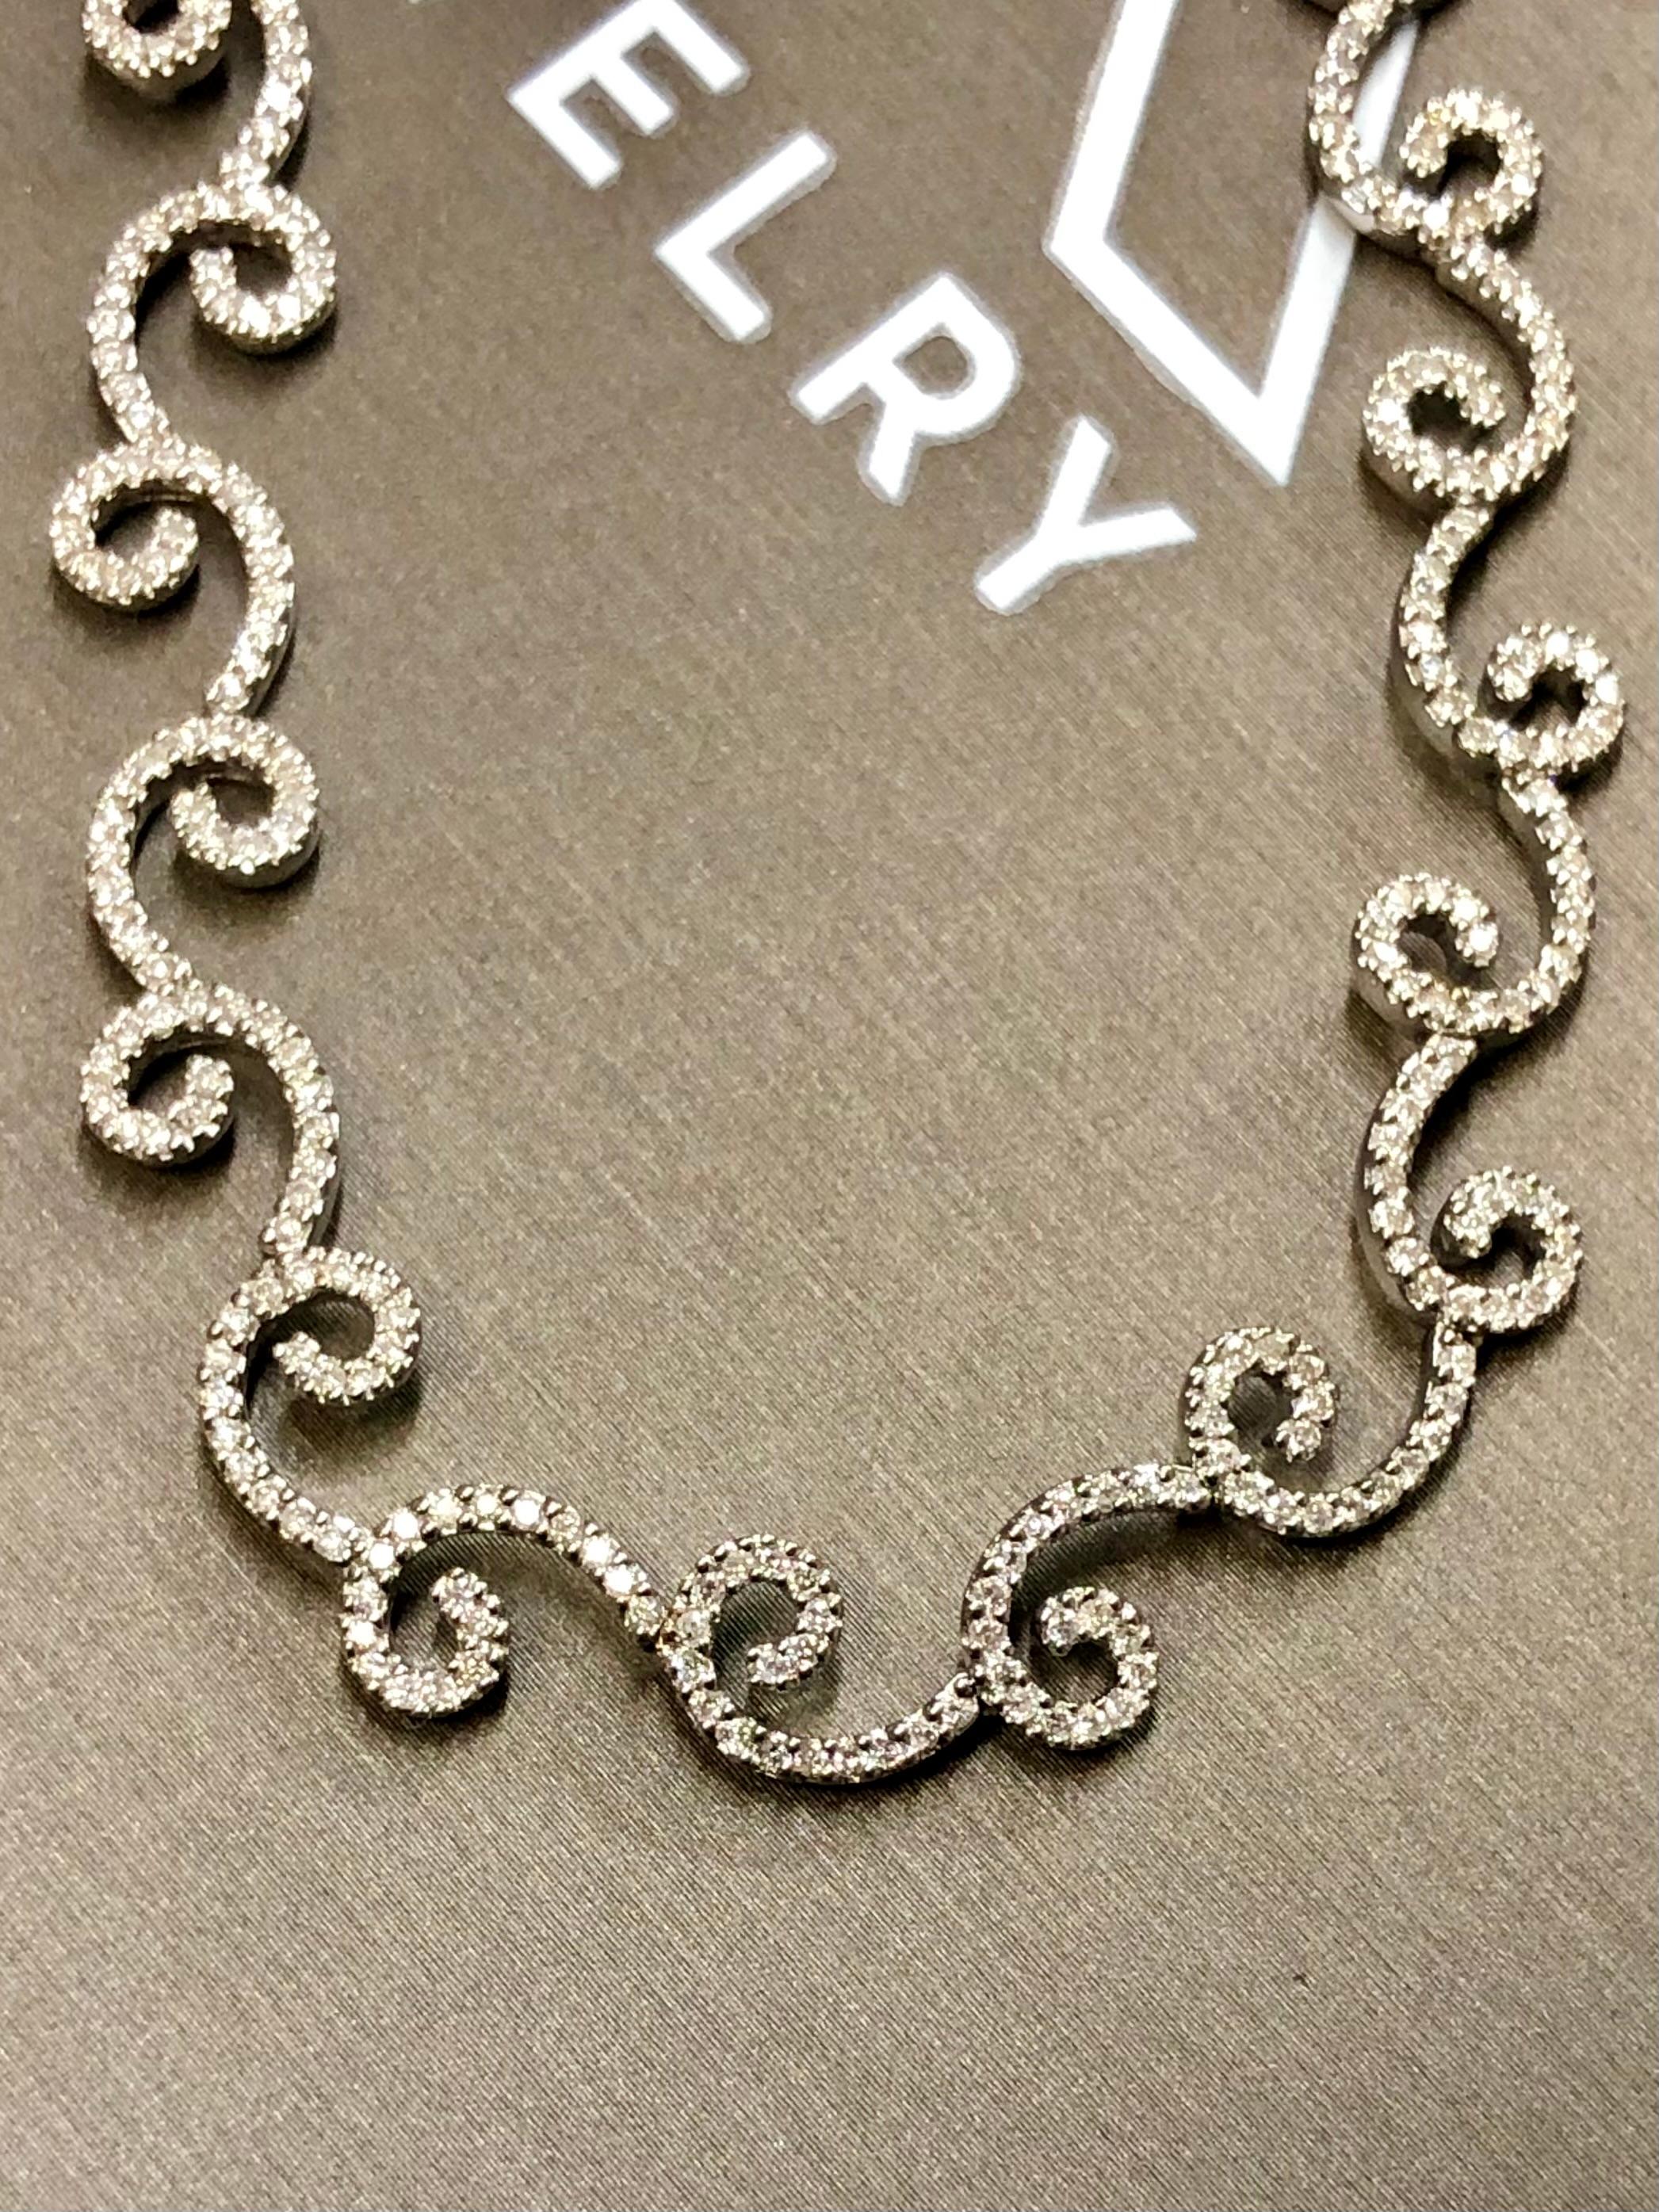 An elegant and wearable necklace done in 14K white gold, prong set with approximately 4.42cttw in H-J color Si1-I1 clarity round diamonds in a contemporary swirl design. Lays beautifully on the neck and the quality of manufacturing is apparent when